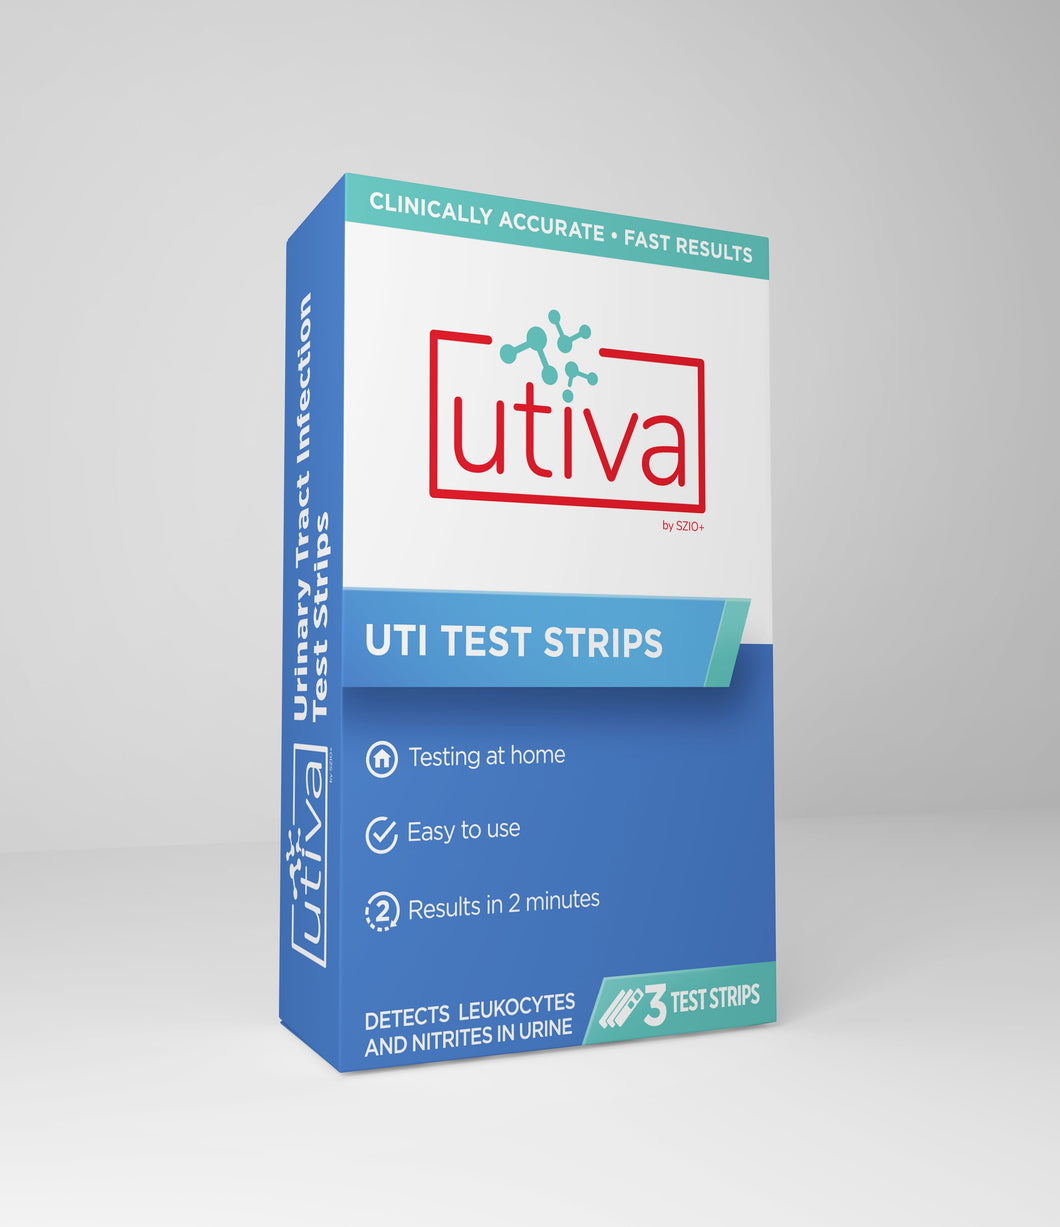 UTI Diagnostic Test Strips - 3 Test Strips Urinary Tract Infection Tests Utiva 